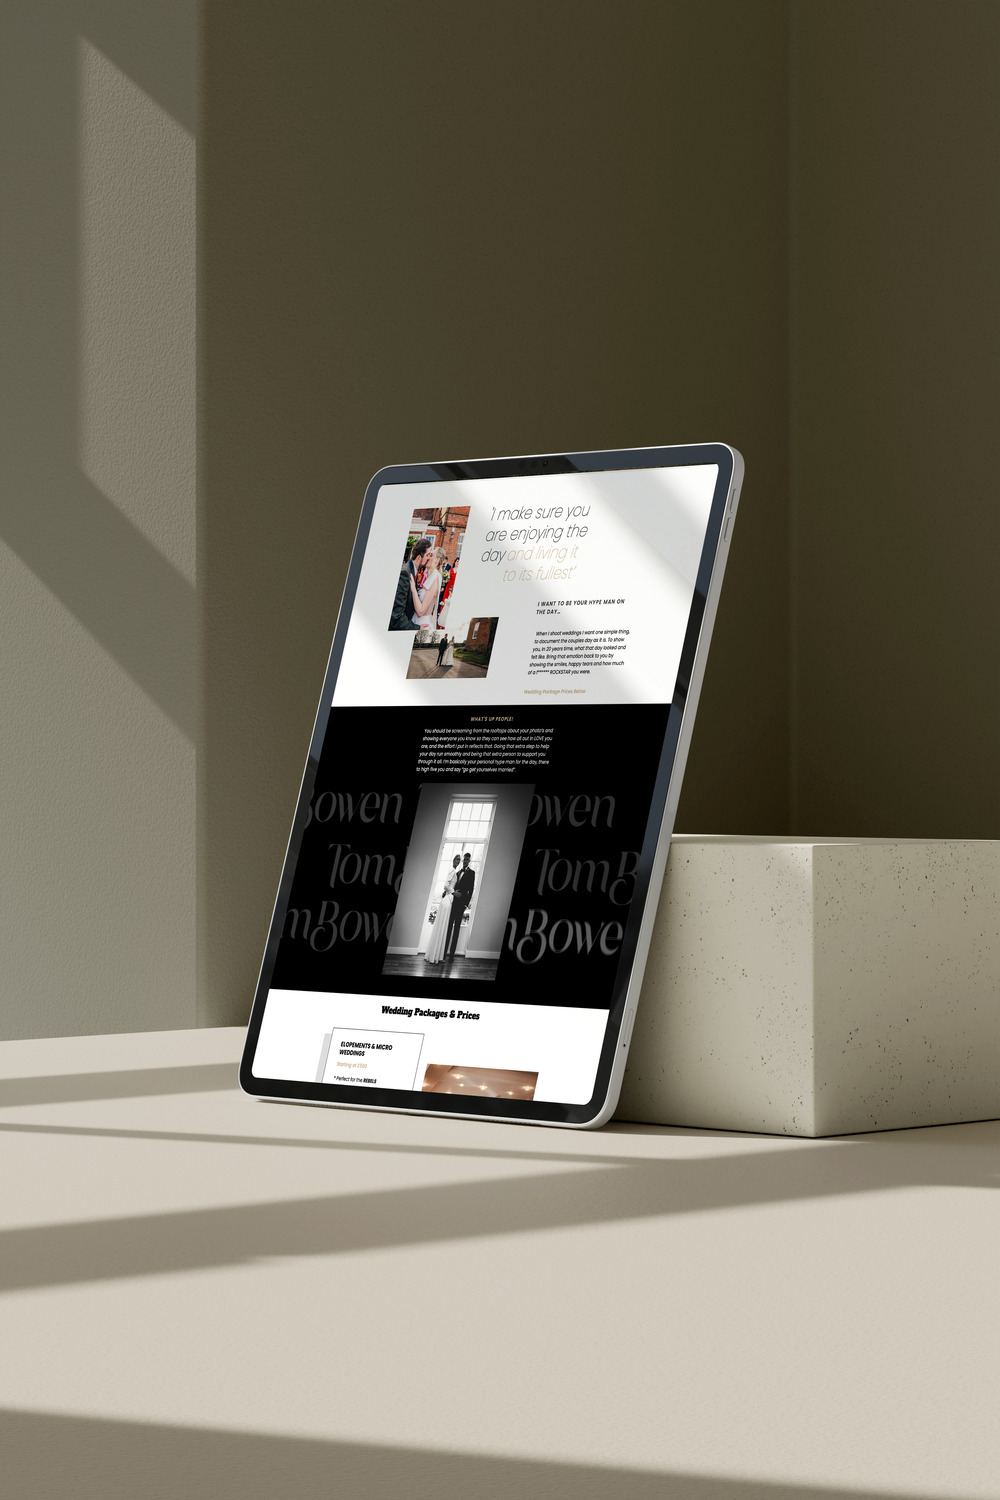 A tablet displaying a wedding photography website stands on a beige surface against a muted background with soft shadows. The website features a mix of colour and black-and-white photos of weddings, showcasing joyful moments and elegant compositions. The visible text highlights the photographer's commitment to ensuring clients enjoy their special day to the fullest.